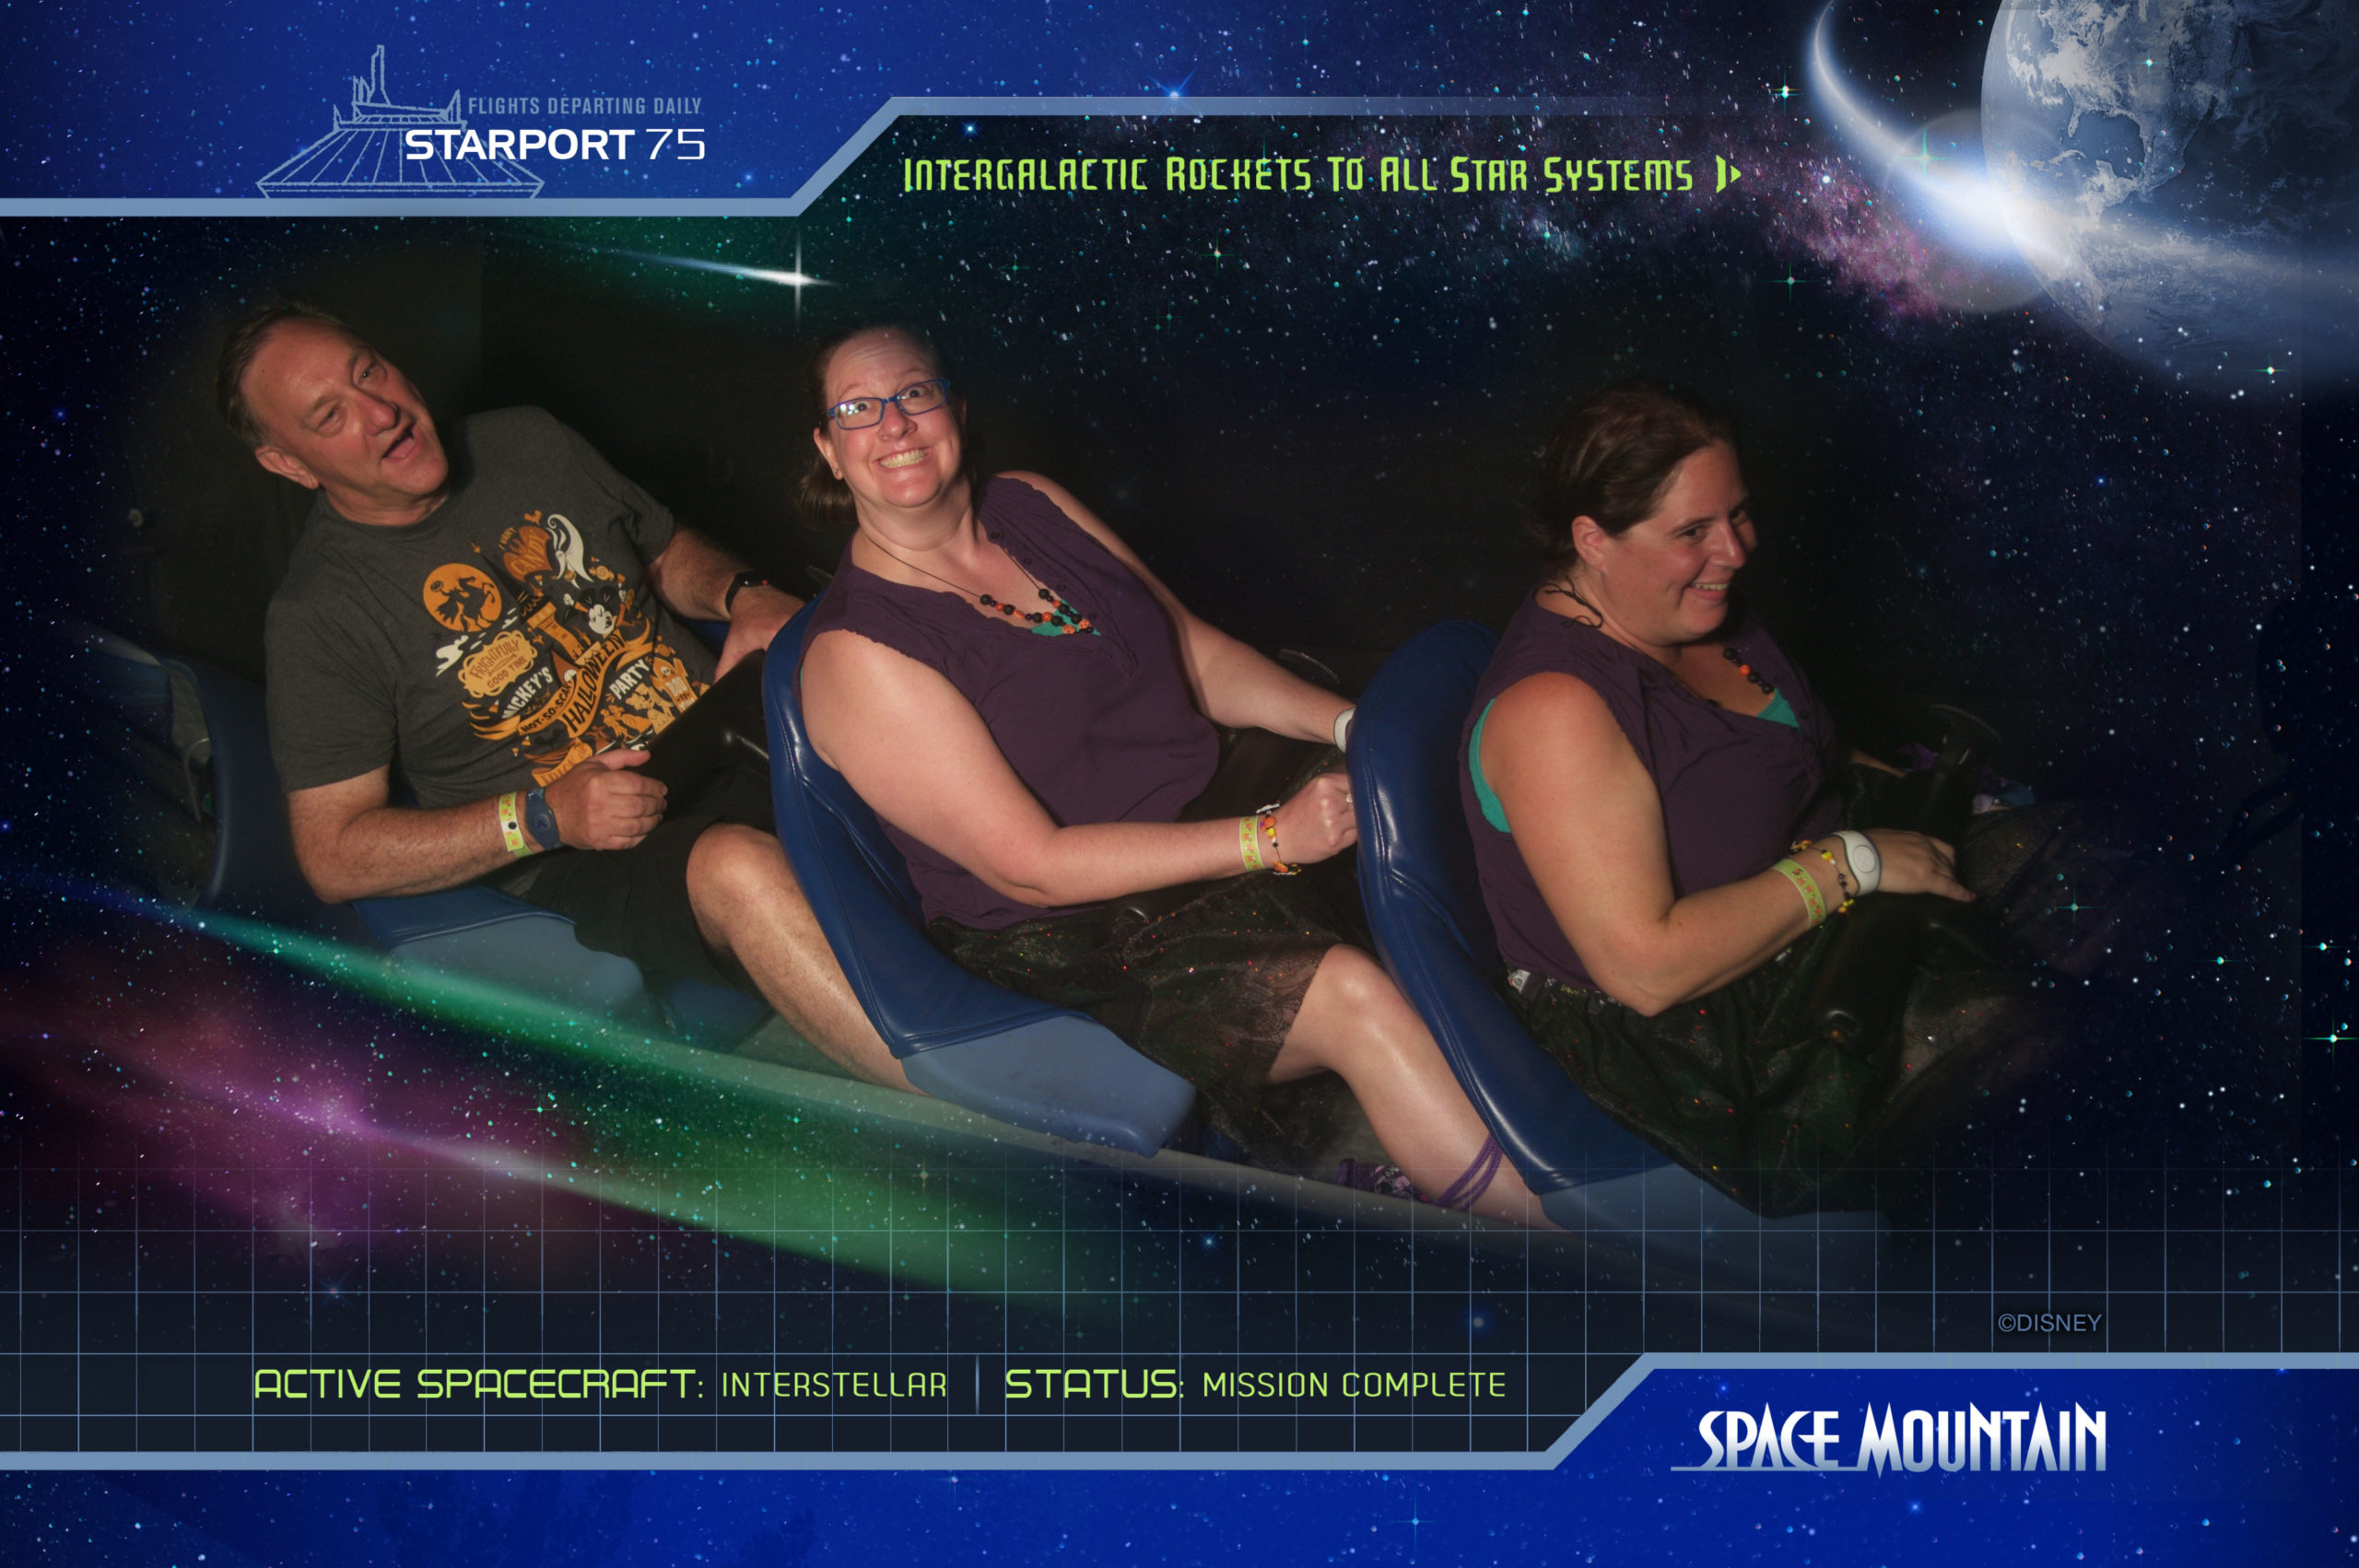 Ms. Williams on Space Mountain!